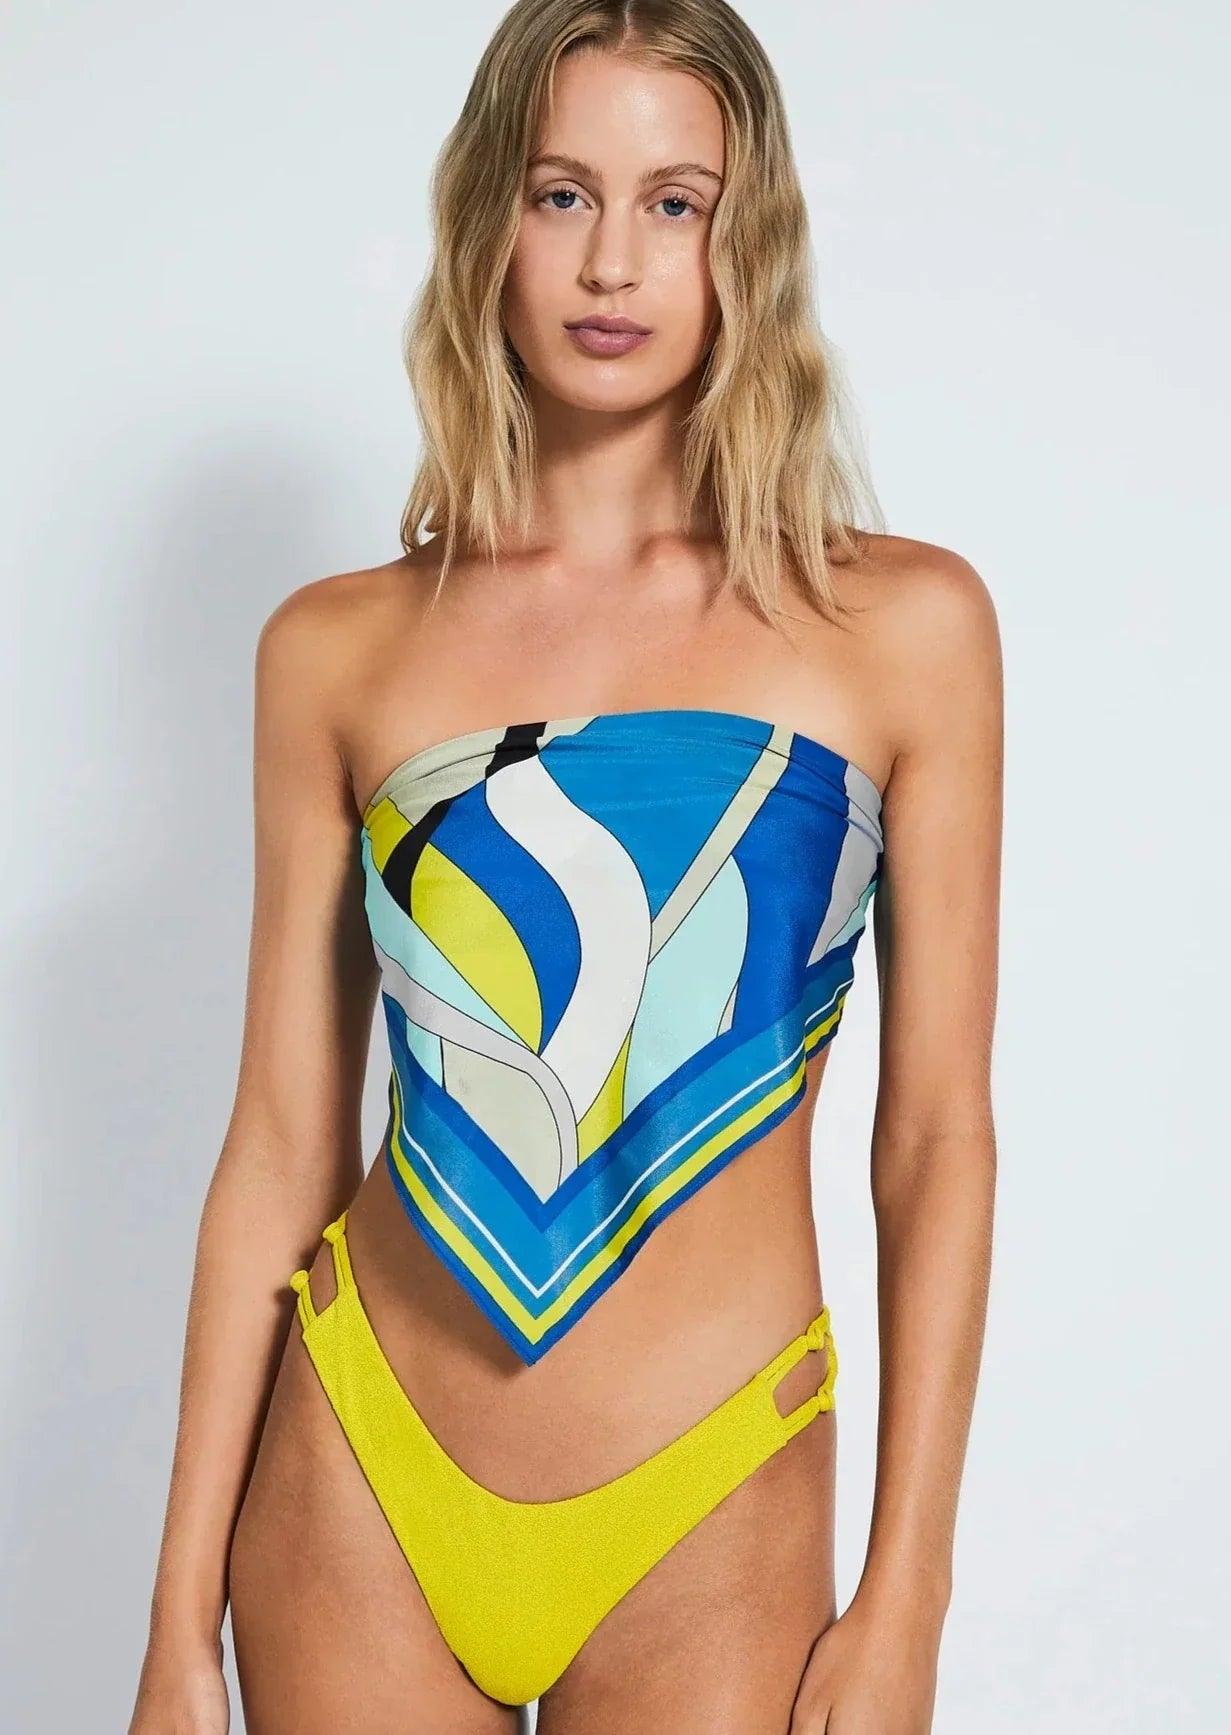 Devon Windsor - Scarf Sarong in Yellow Blue Print - OutDazl